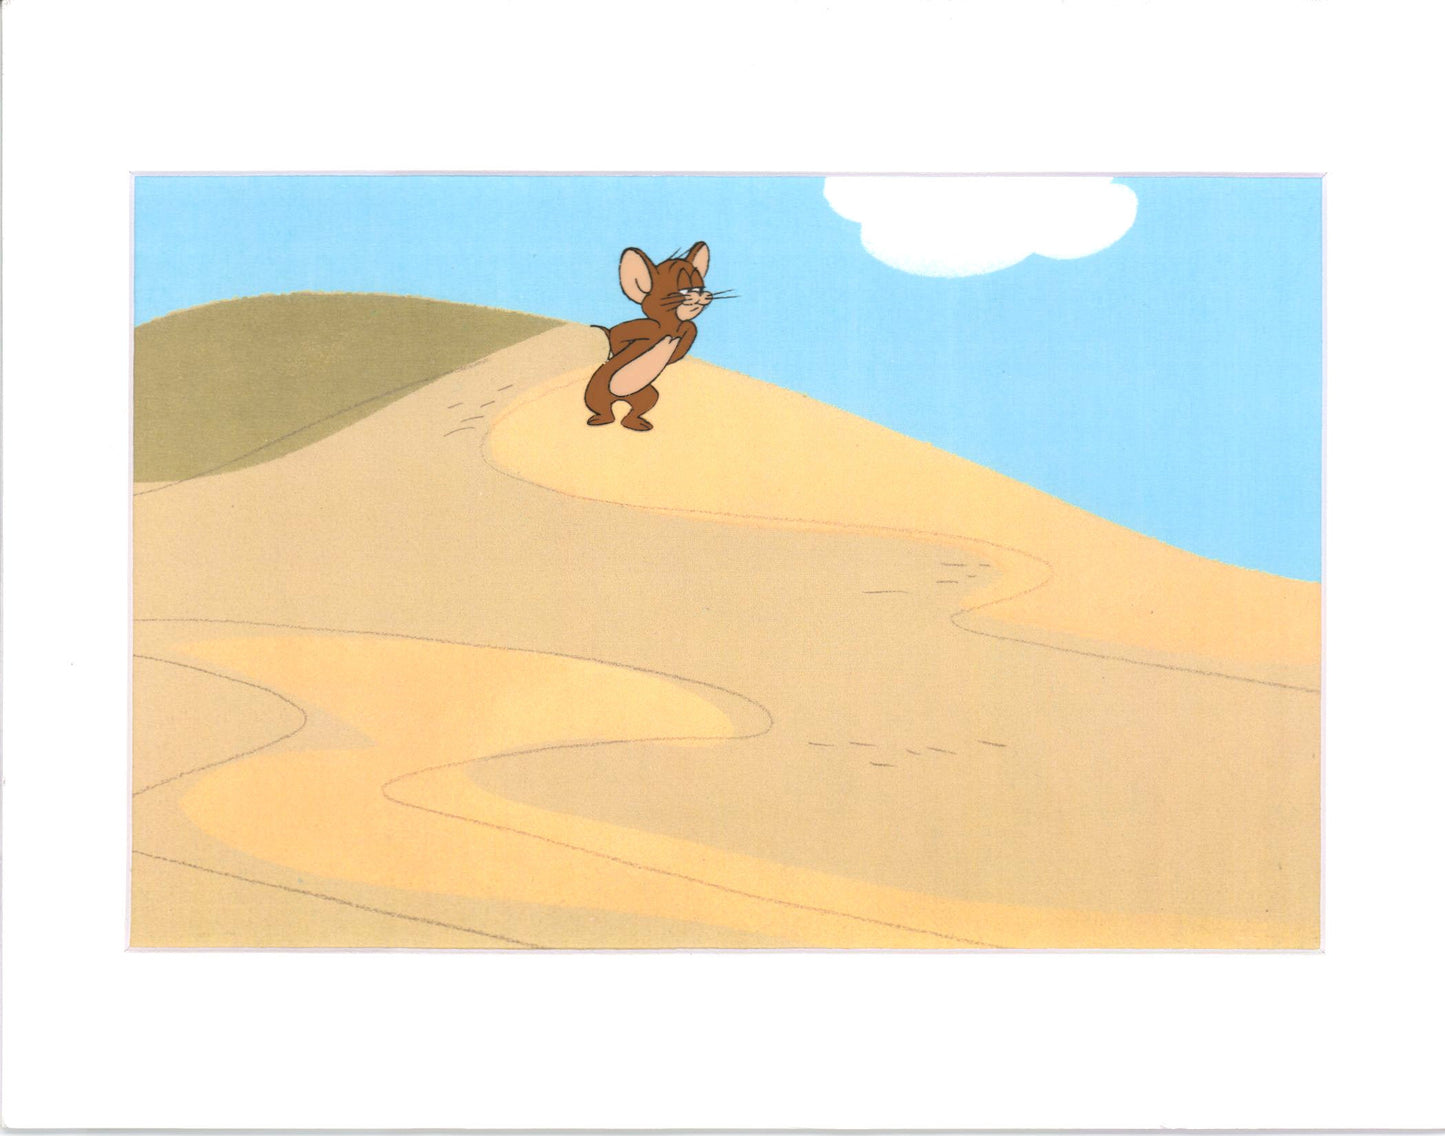 Tom & Jerry Original Production Animation Cel from Filmation 1980-82 b4454